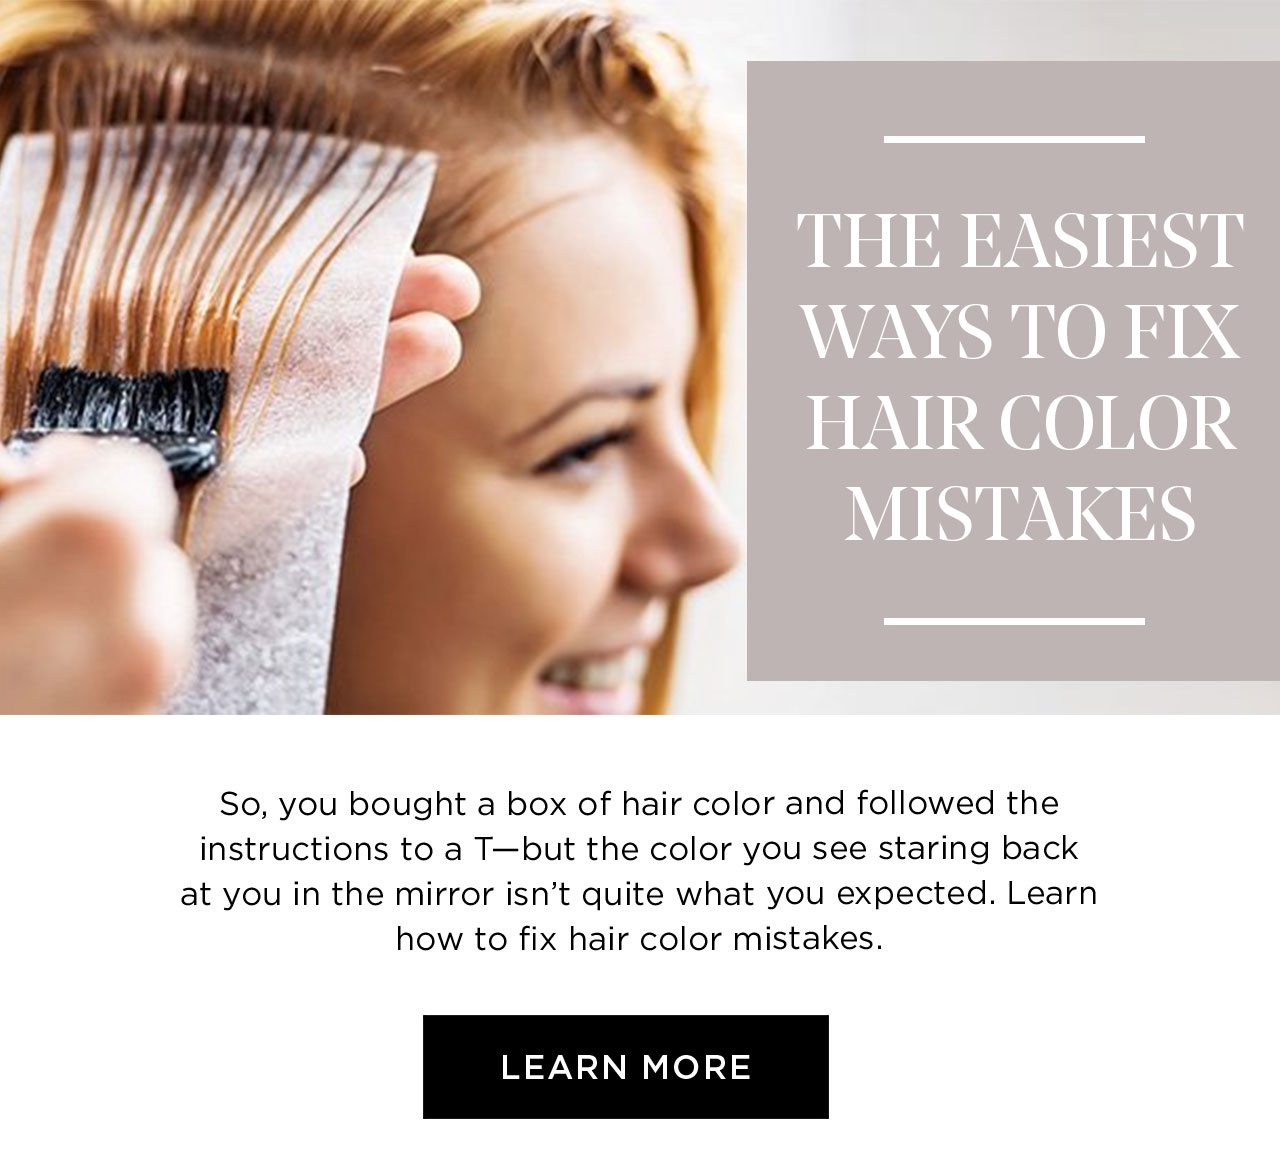 The easiest ways to fix hair color mistakes - Learn more